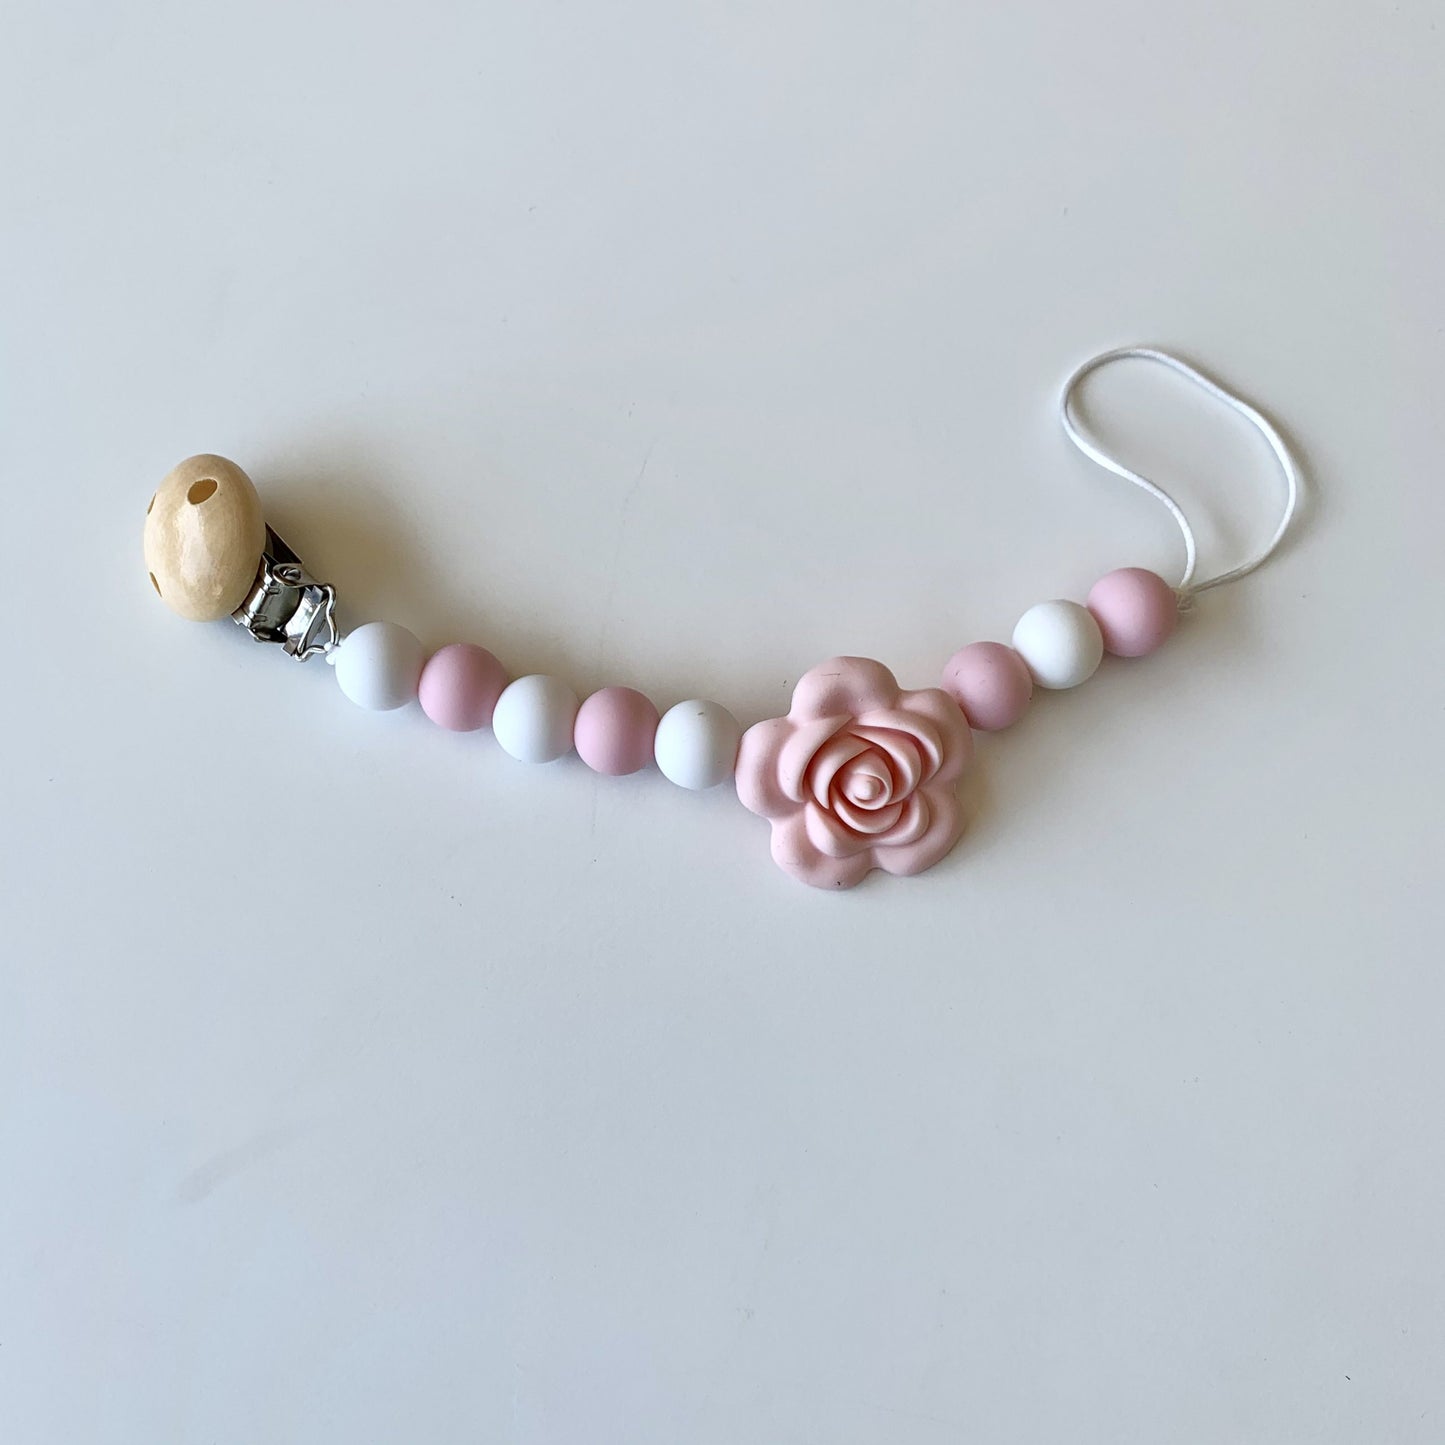 Pacifier Holder - Wood + Silicone Rose - Pink quartz